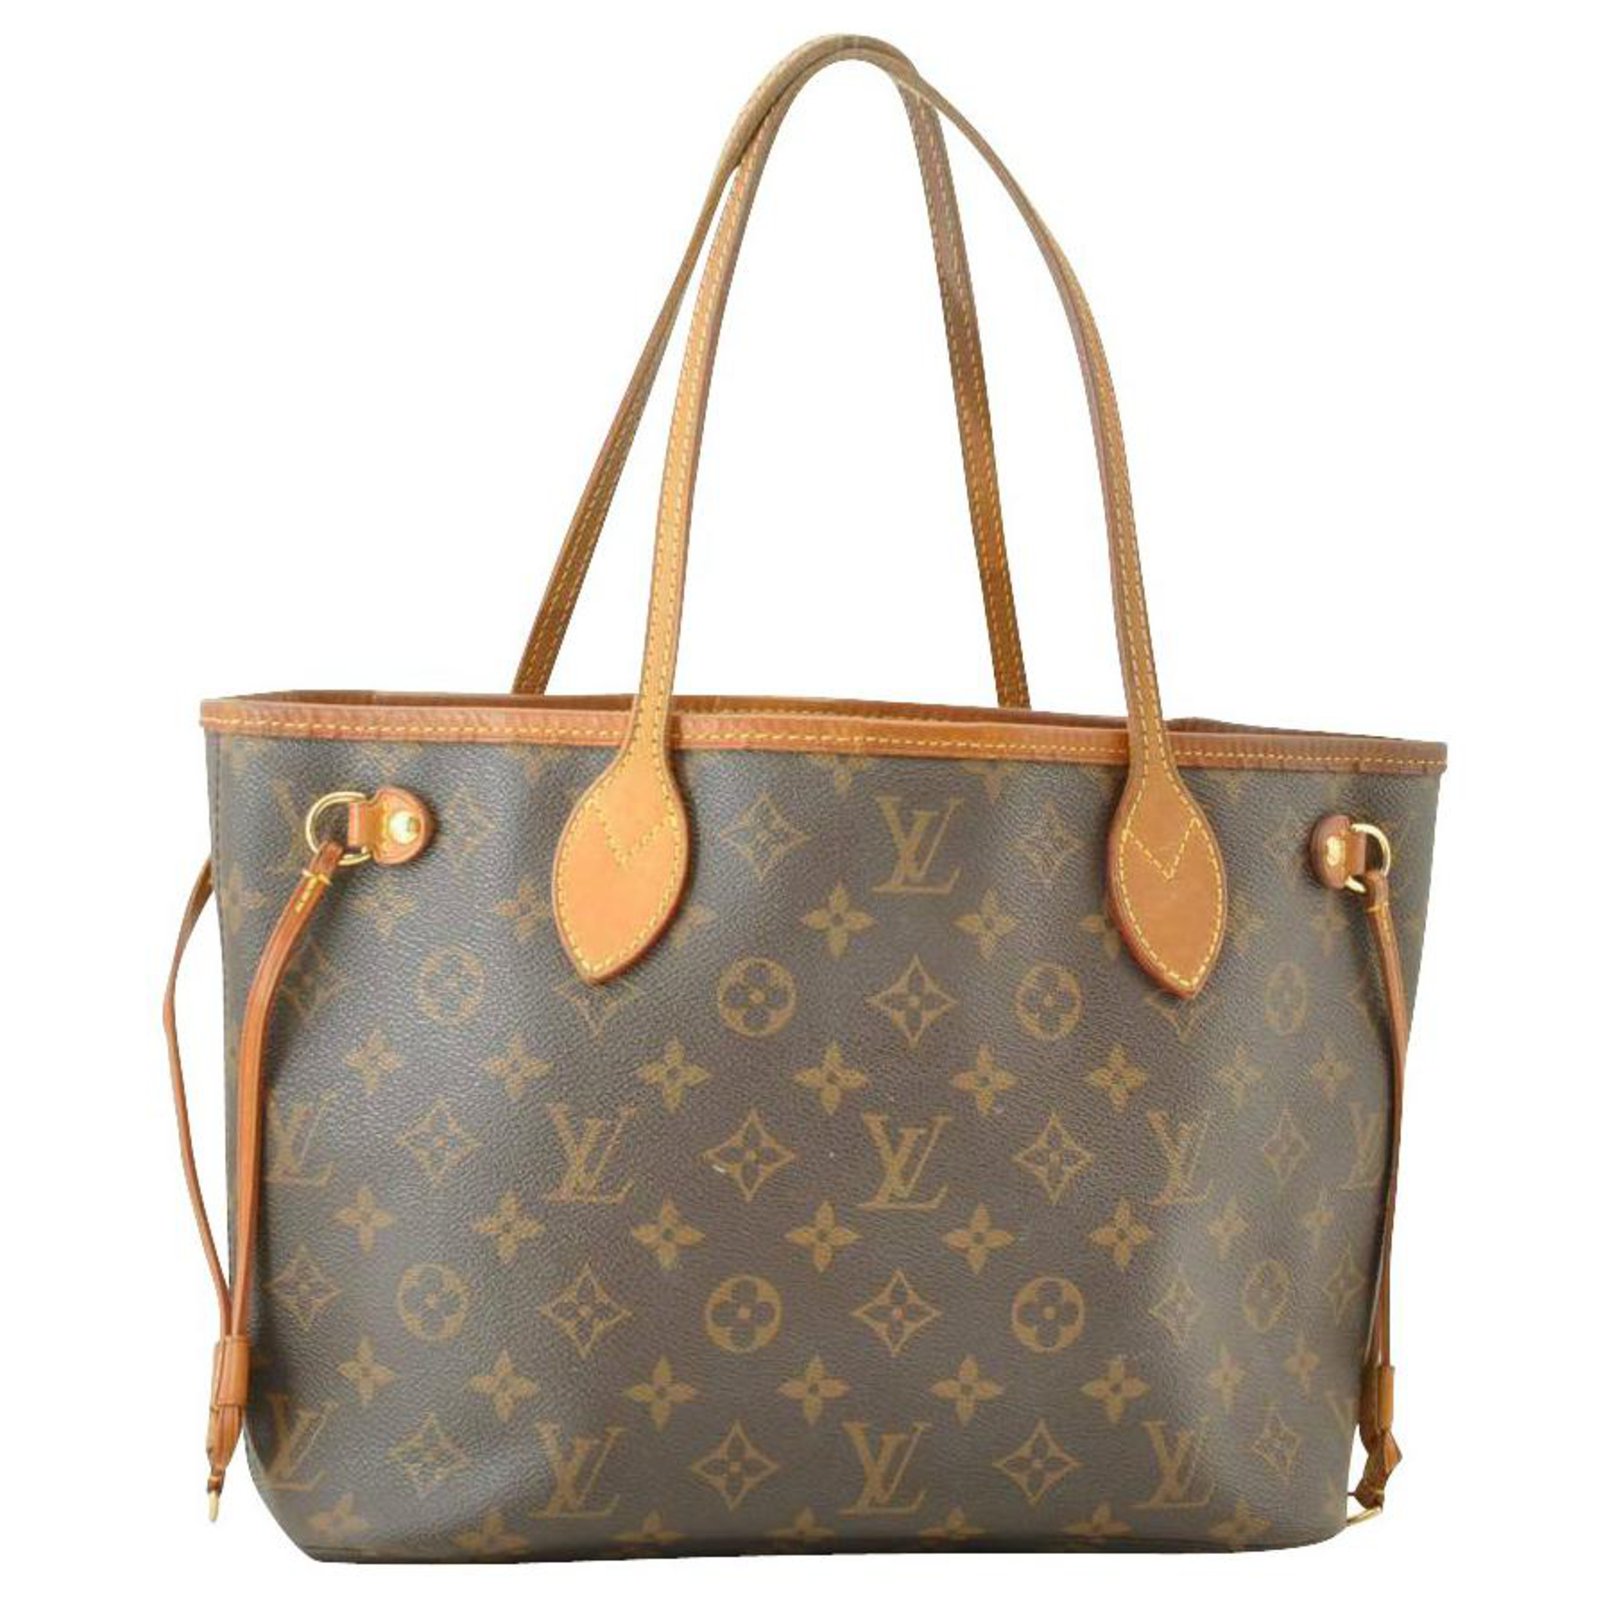 Removing Stickiness From A Louis Vuitton Pochette  Cheap louis vuitton bags,  Cheap louis vuitton handbags, Louis vuitton handbags sale